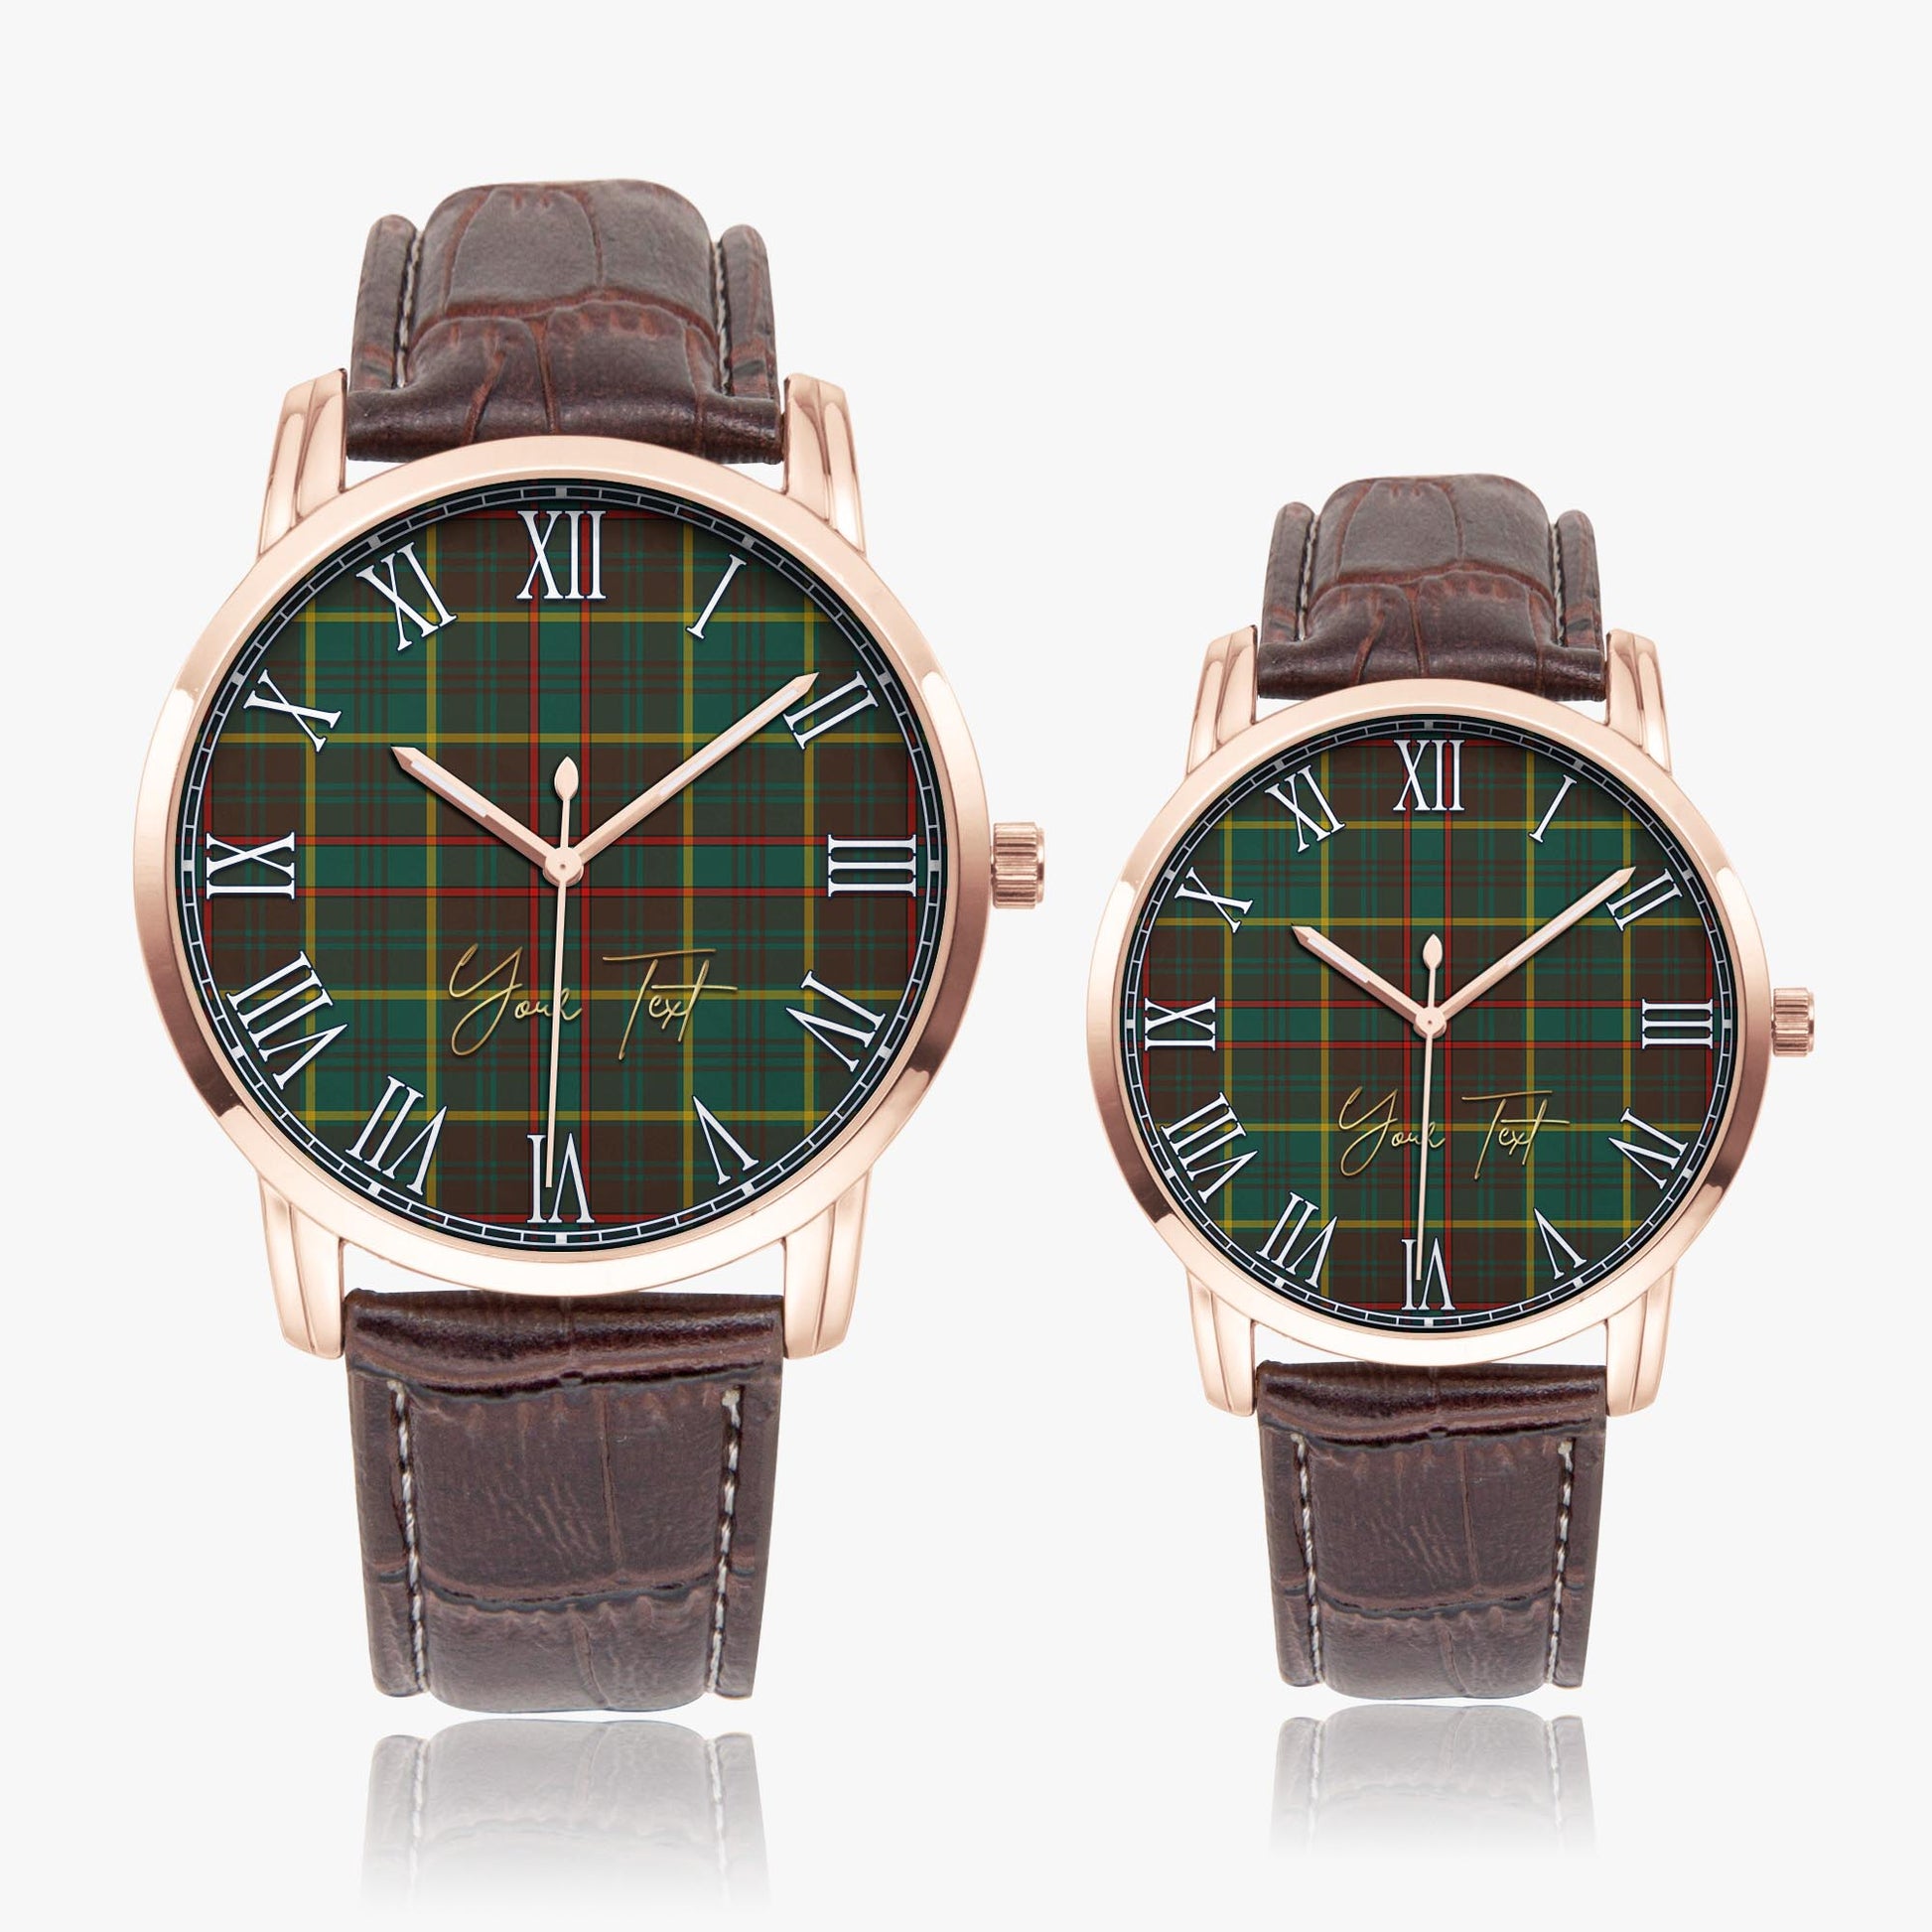 Ontario Province Canada Tartan Personalized Your Text Leather Trap Quartz Watch Wide Type Rose Gold Case With Brown Leather Strap - Tartanvibesclothing